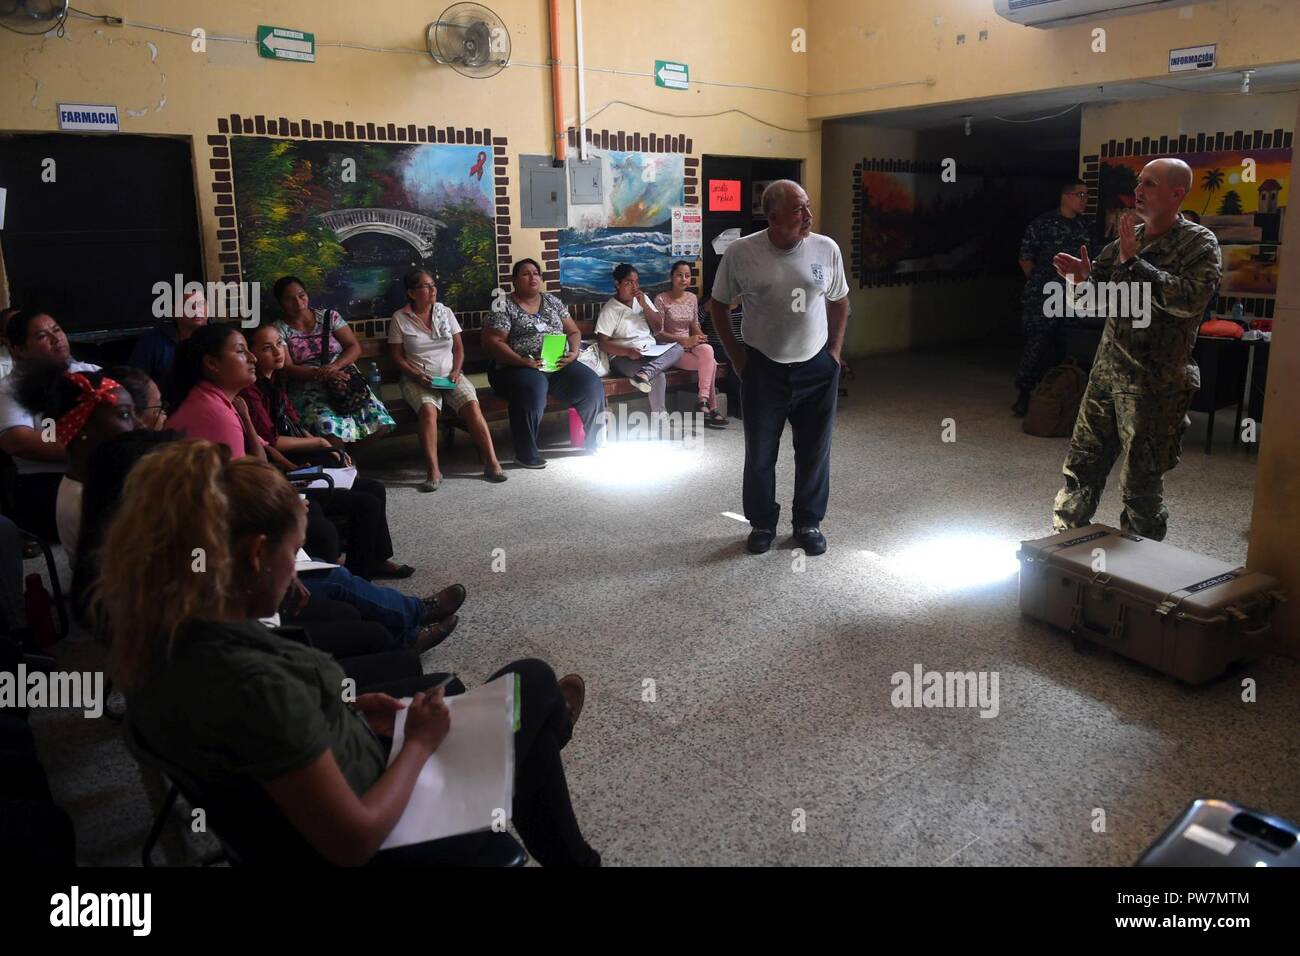 PUERTO BARRIOS, Guatemala (Sept. 26, 2017) Lt. Cmdr. Ian Sutherland, technical director for the Navy Entomology Center of Excellence, gives an entomology lecture to Guatemalan medical professionals, during a subject matter exchange at Puerto Barrios Health Clinic, in support of Southern Partnership Station 17. SPS 17 is a U.S. Navy deployment executed by U.S. Naval Forces Southern Command/U.S. 4th Fleet, focused on subject matter expert exchanges with partner nation militaries and security forces in Central and South America. Stock Photo